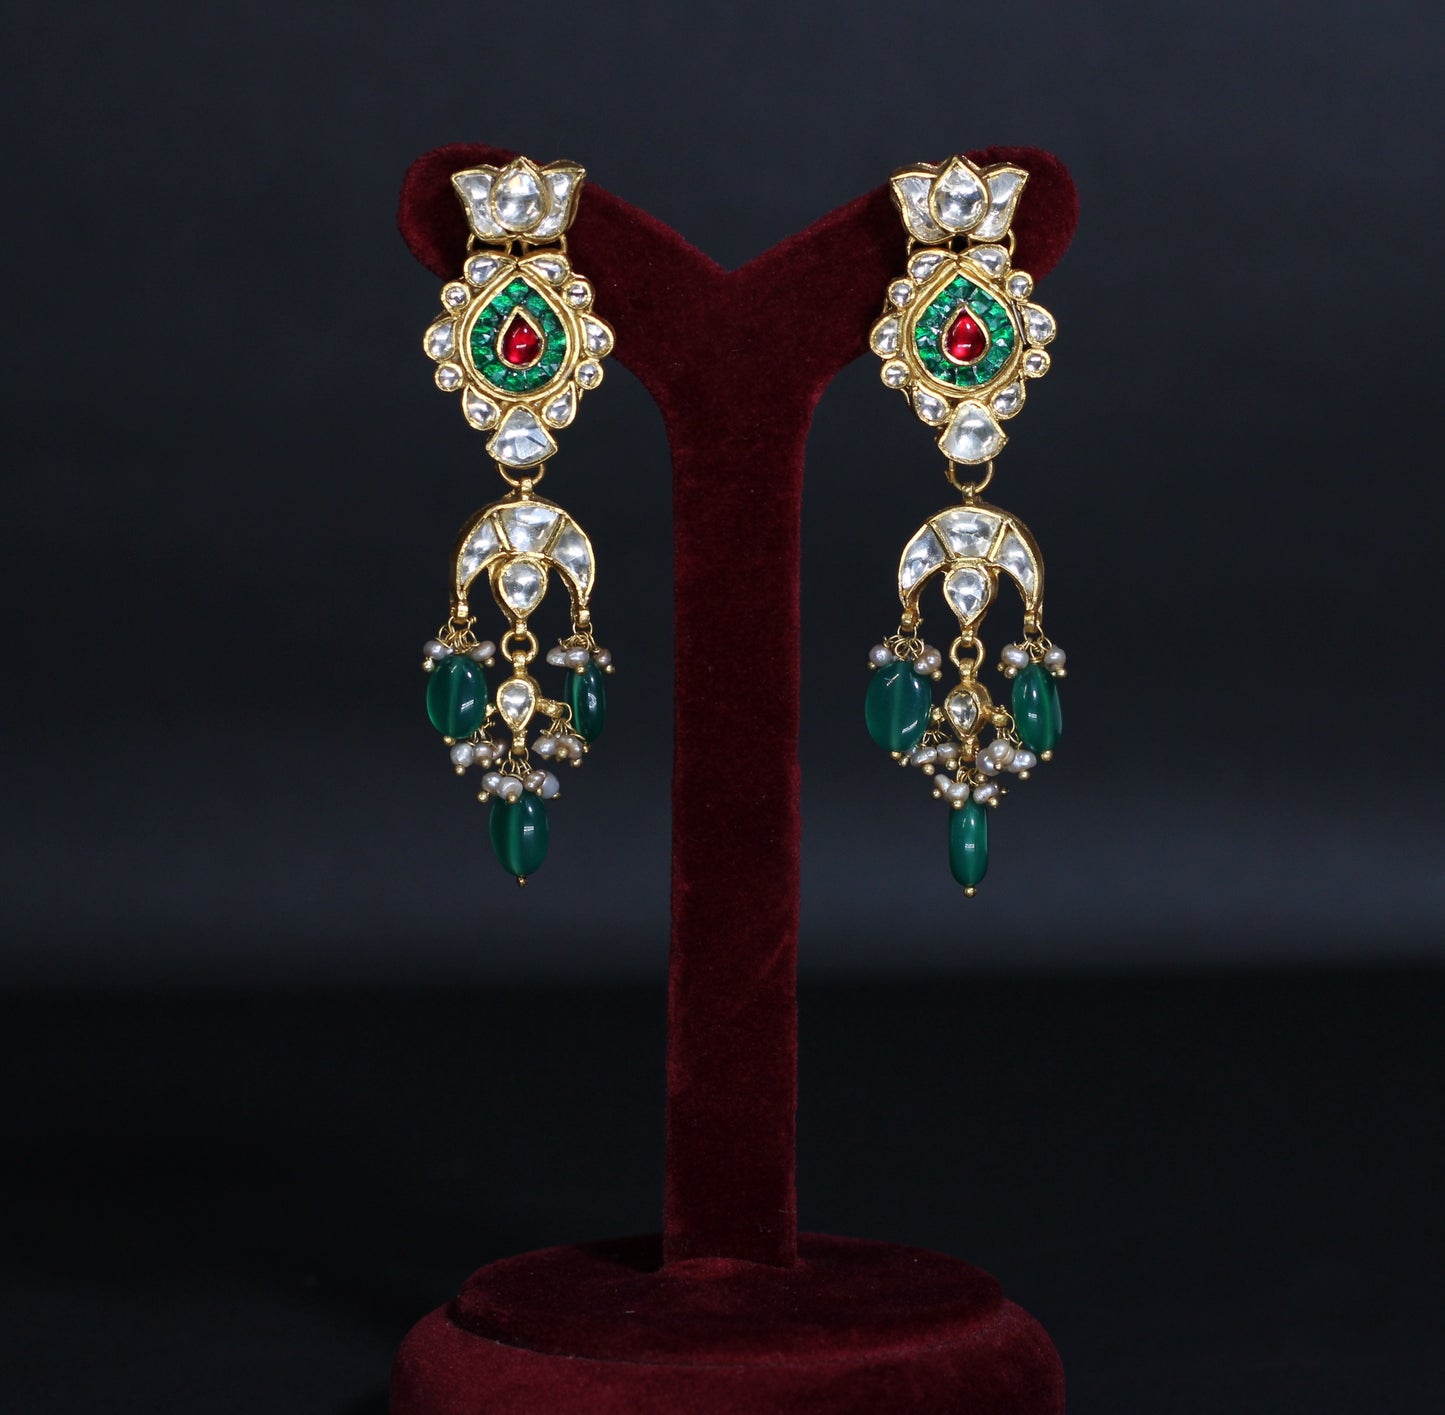 NECKLACE AND EARRING IN92.5 STERLING SILVER  WITH 18KT GOLD PLATED WITH  KUNDAN,GREEN ONYX & RED ONYX AND FRESH WATER PEARLS